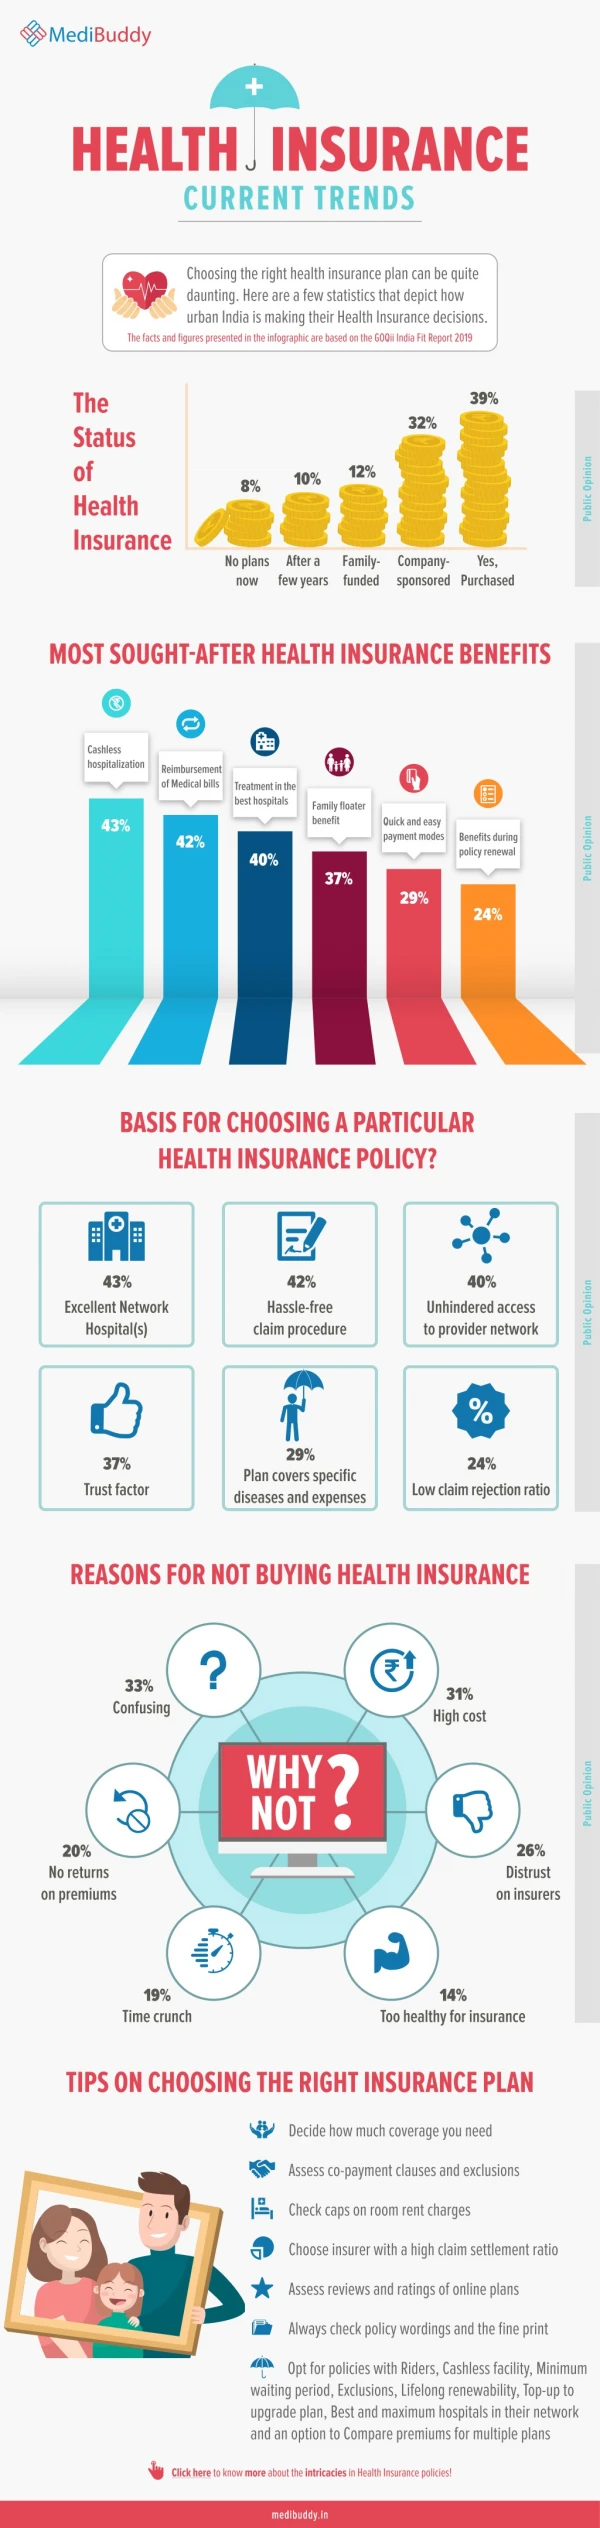 Current Health Insurance Trends in India